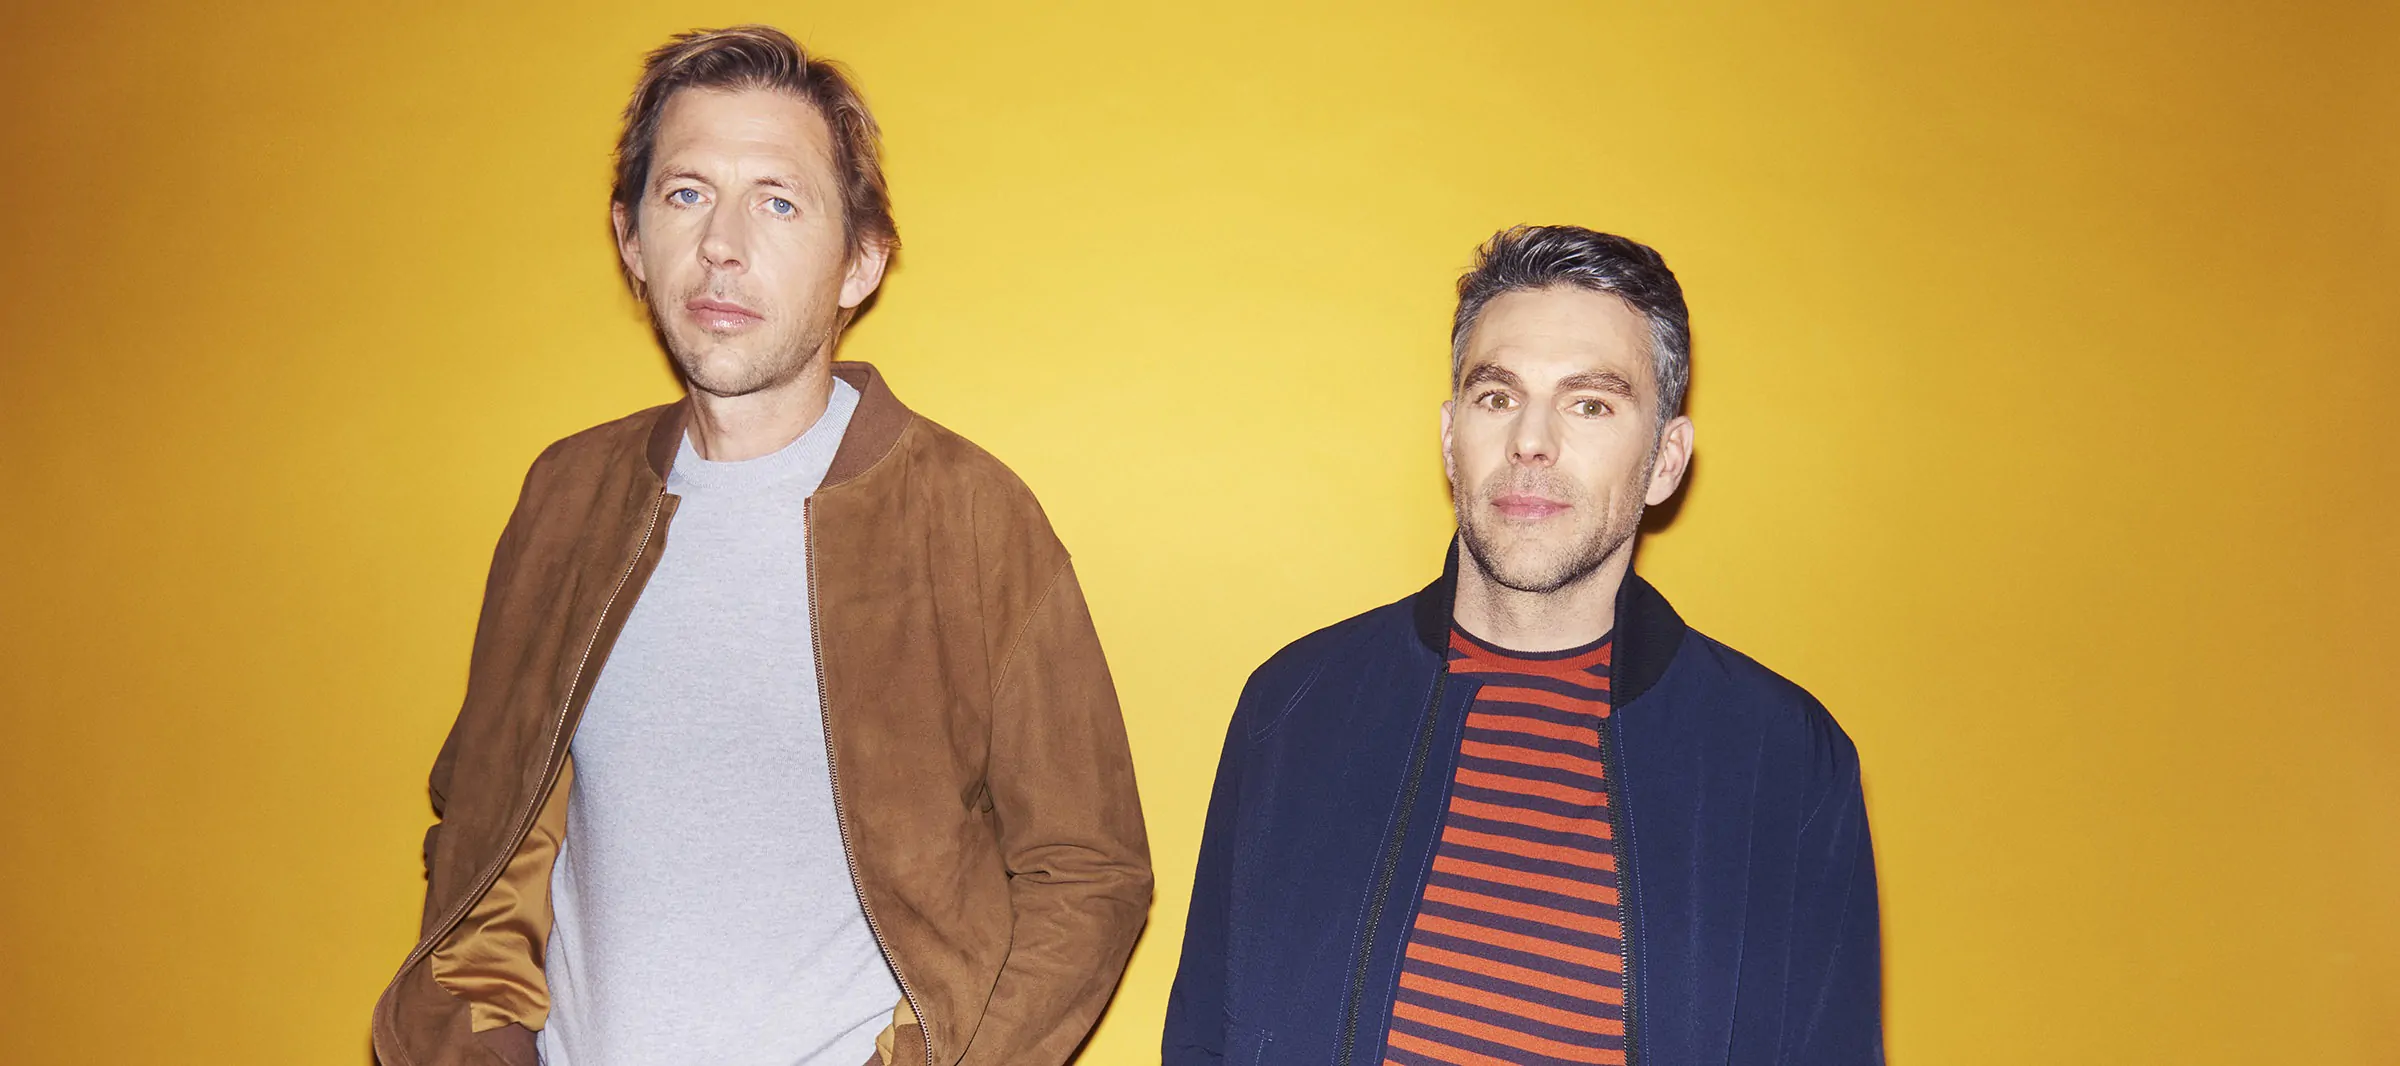 GROOVE ARMADA release video for new single ‘Get Out On The Dancefloor’ – Watch Now